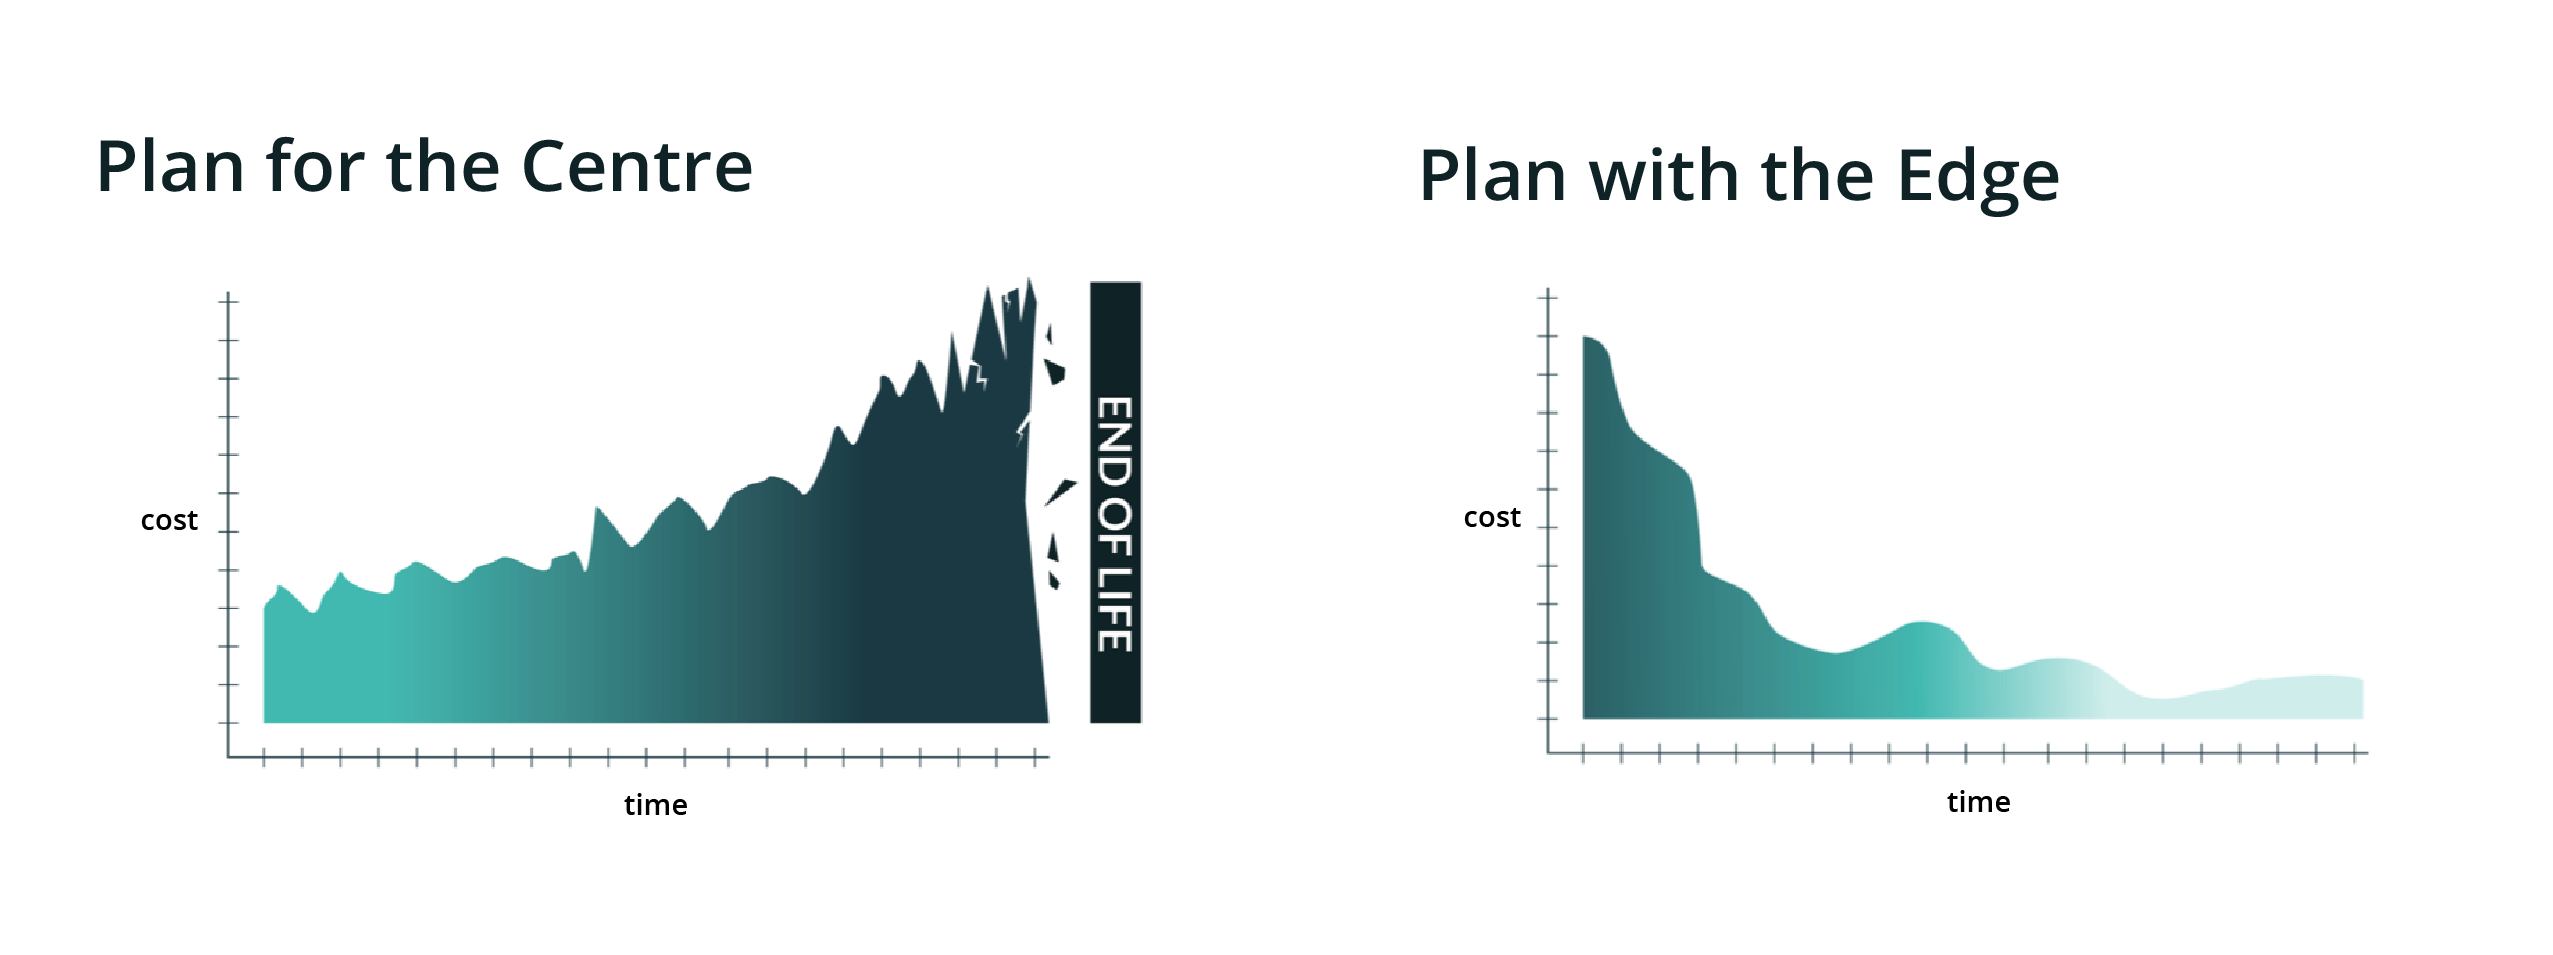 Figure 3. These two groups show the costs over time for when planning for the centre (where costs increase over
time) and planning with the edge (where costs decrease over time).”